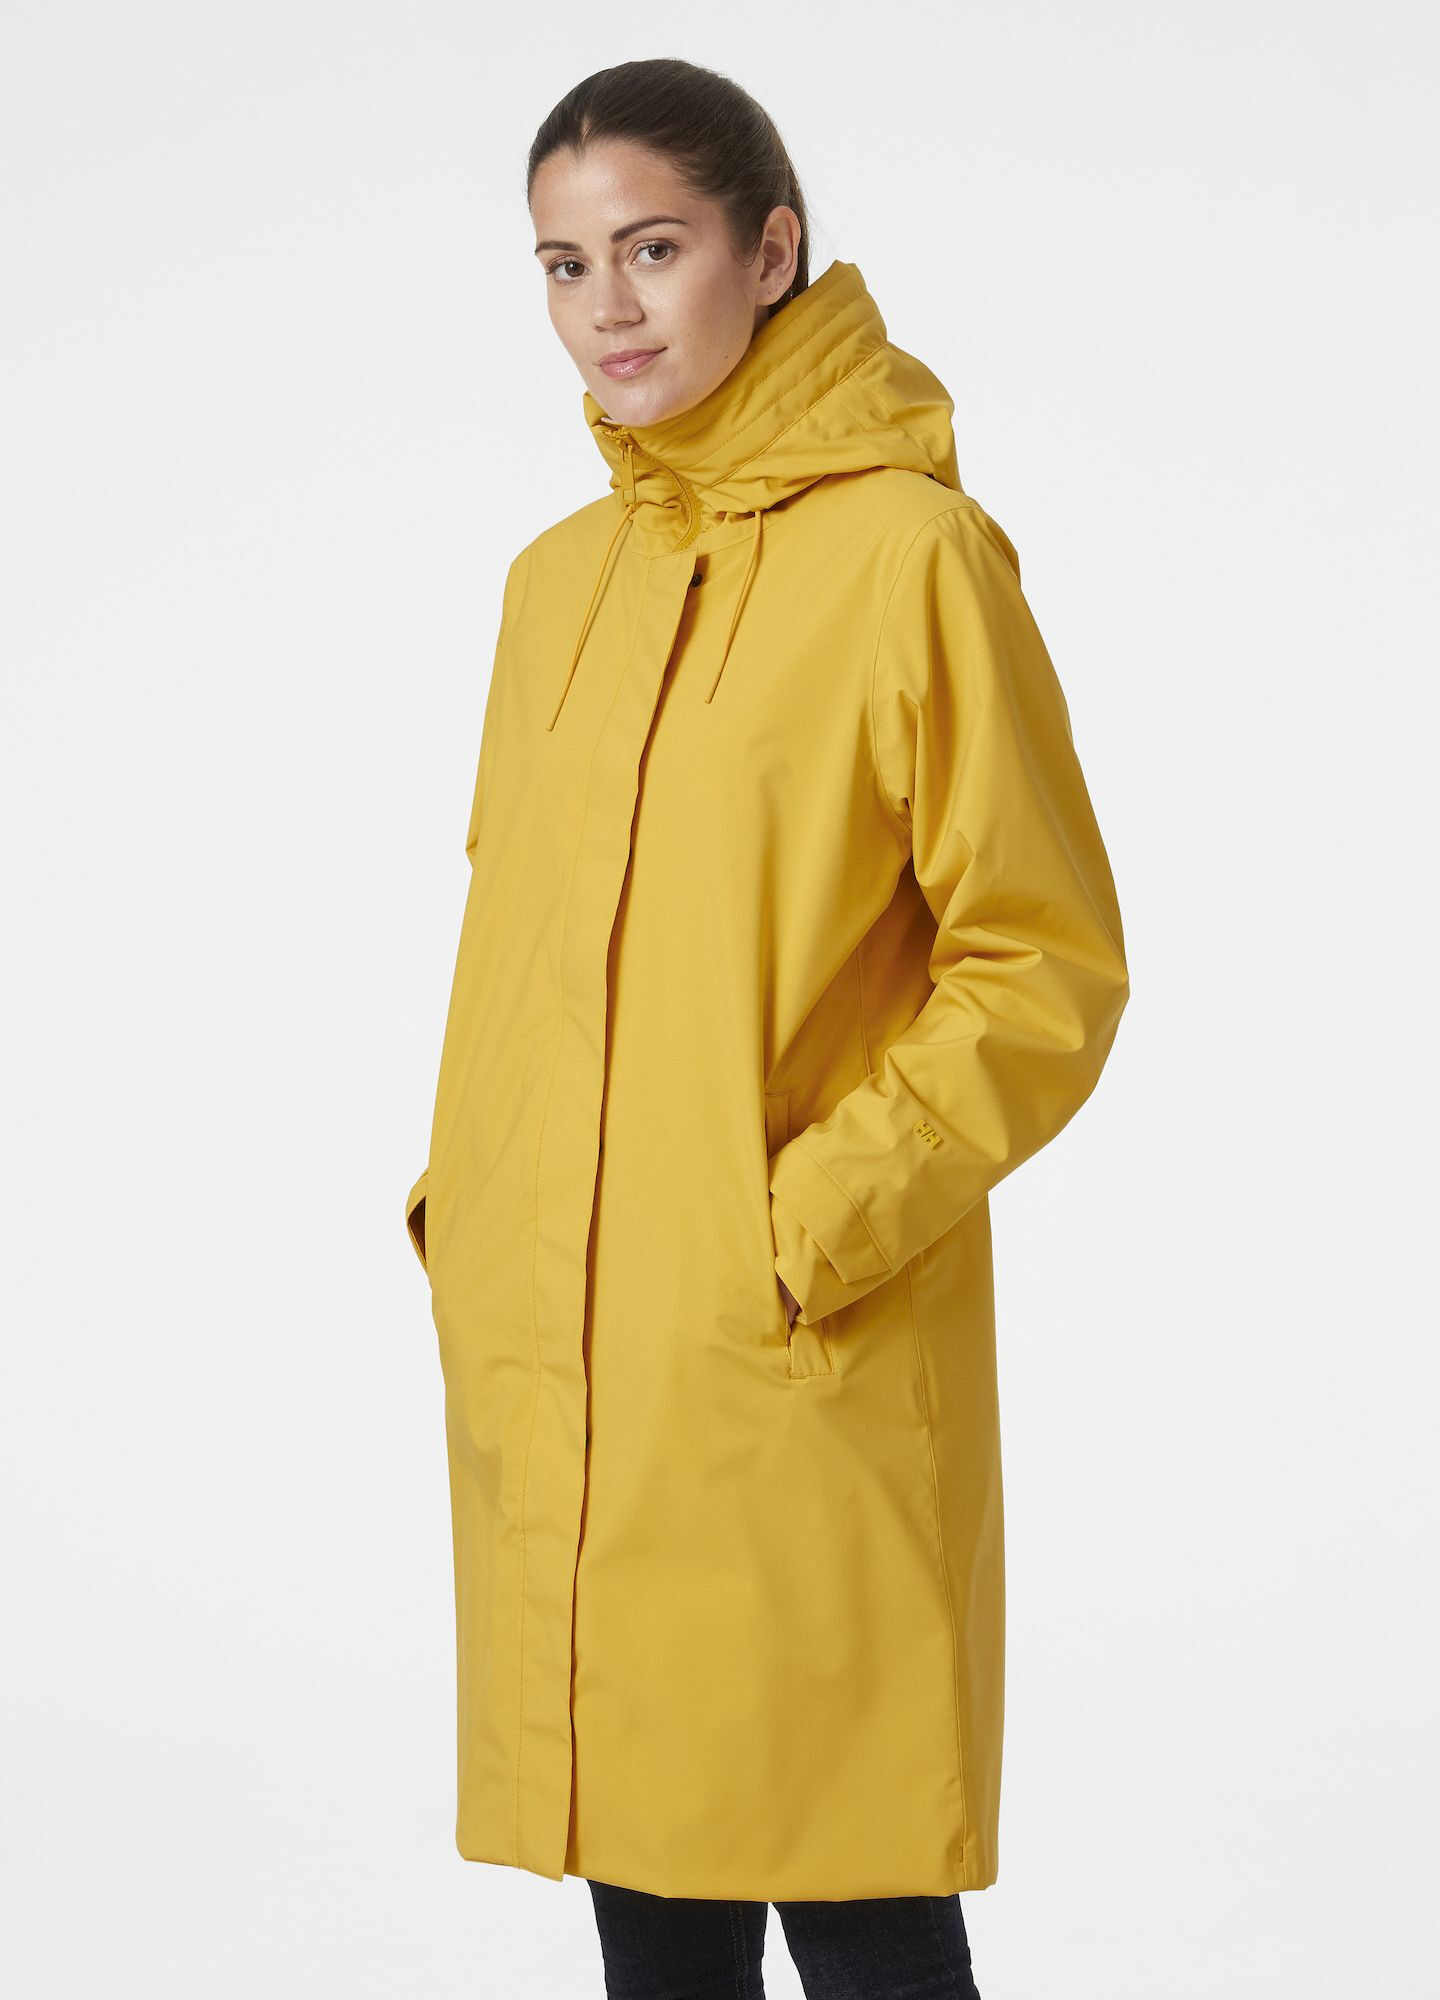 Helly Hansen Victoria Spring Coat - Chaqueta impermeable - Mujer | Hardloop